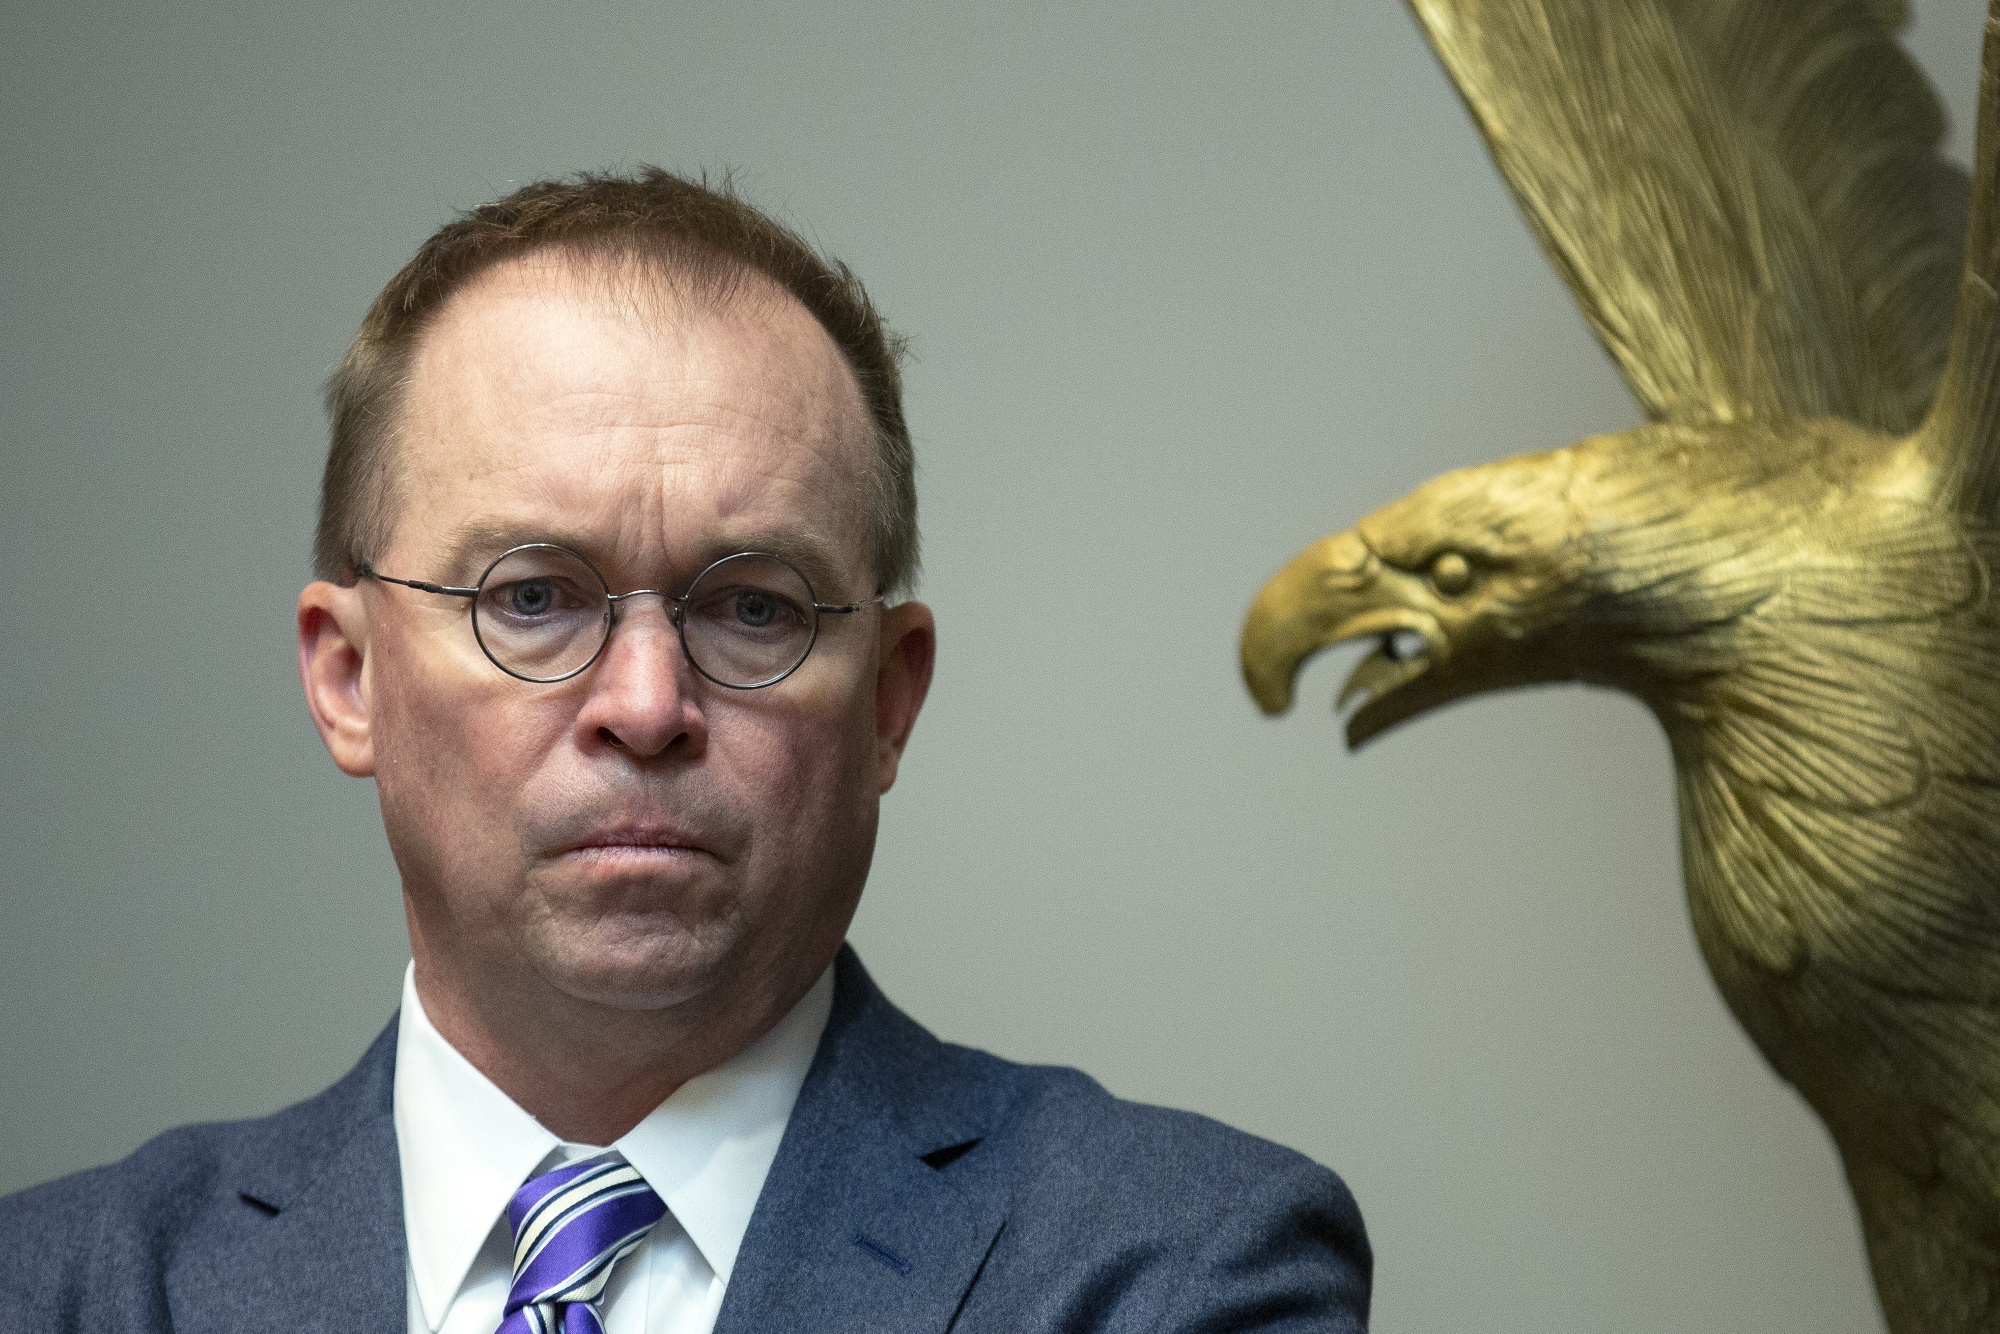 Mick Mulvaney said Trump “bears some” responsibility for the chaos, along with the rioters.